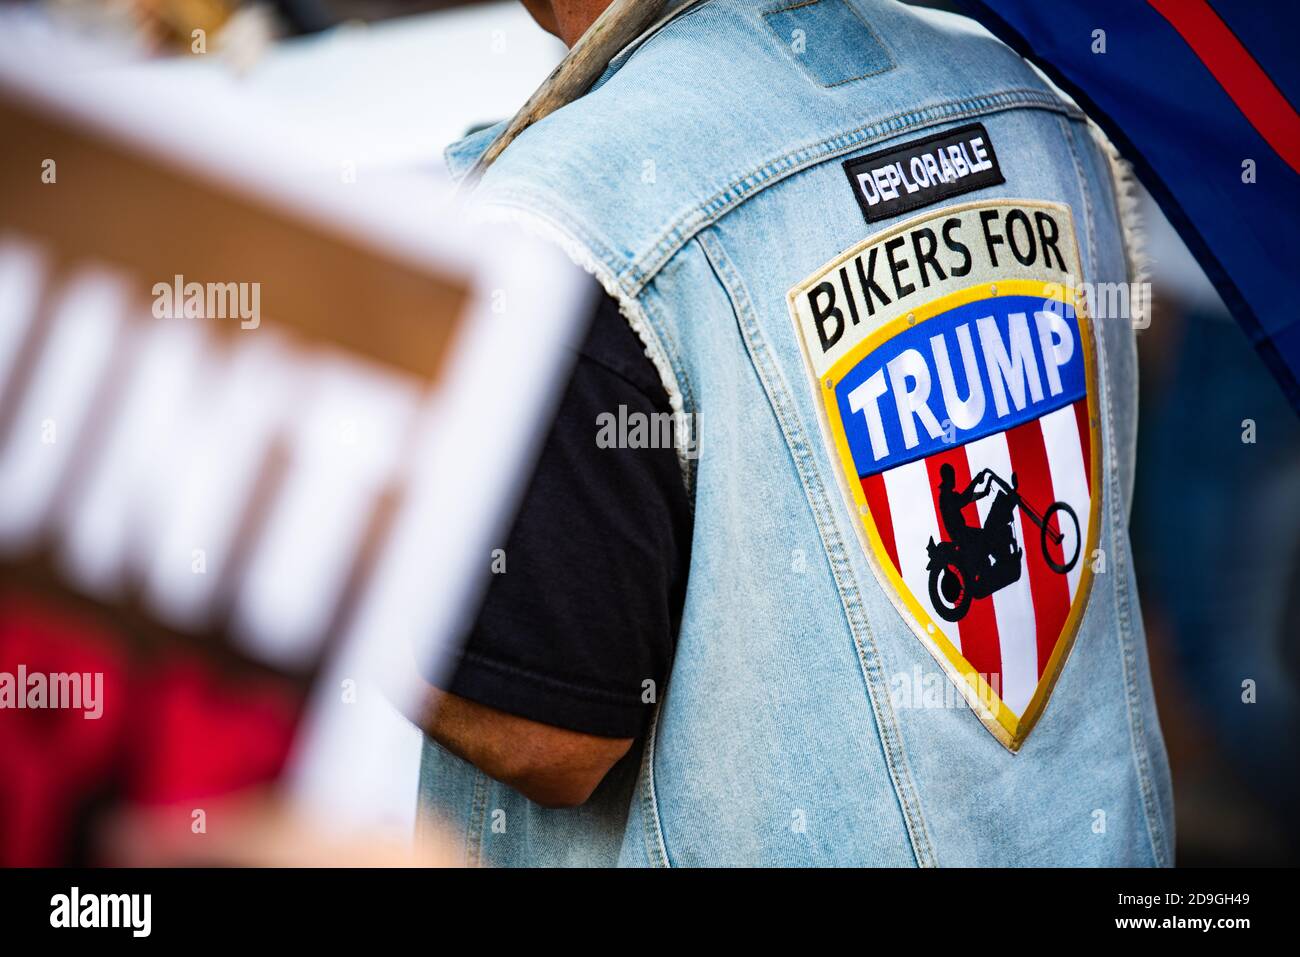 Philadelphia, USA. 5th November, 2020. A man wearing a Bikers for Trump jacket at the Philadelphia Convention Center. Two days after the Presidential election, Donald Trump sued several states to stop counting legally cast ballots in States that lean towards Joe Biden. Credit: Chris Baker Evens. Stock Photo